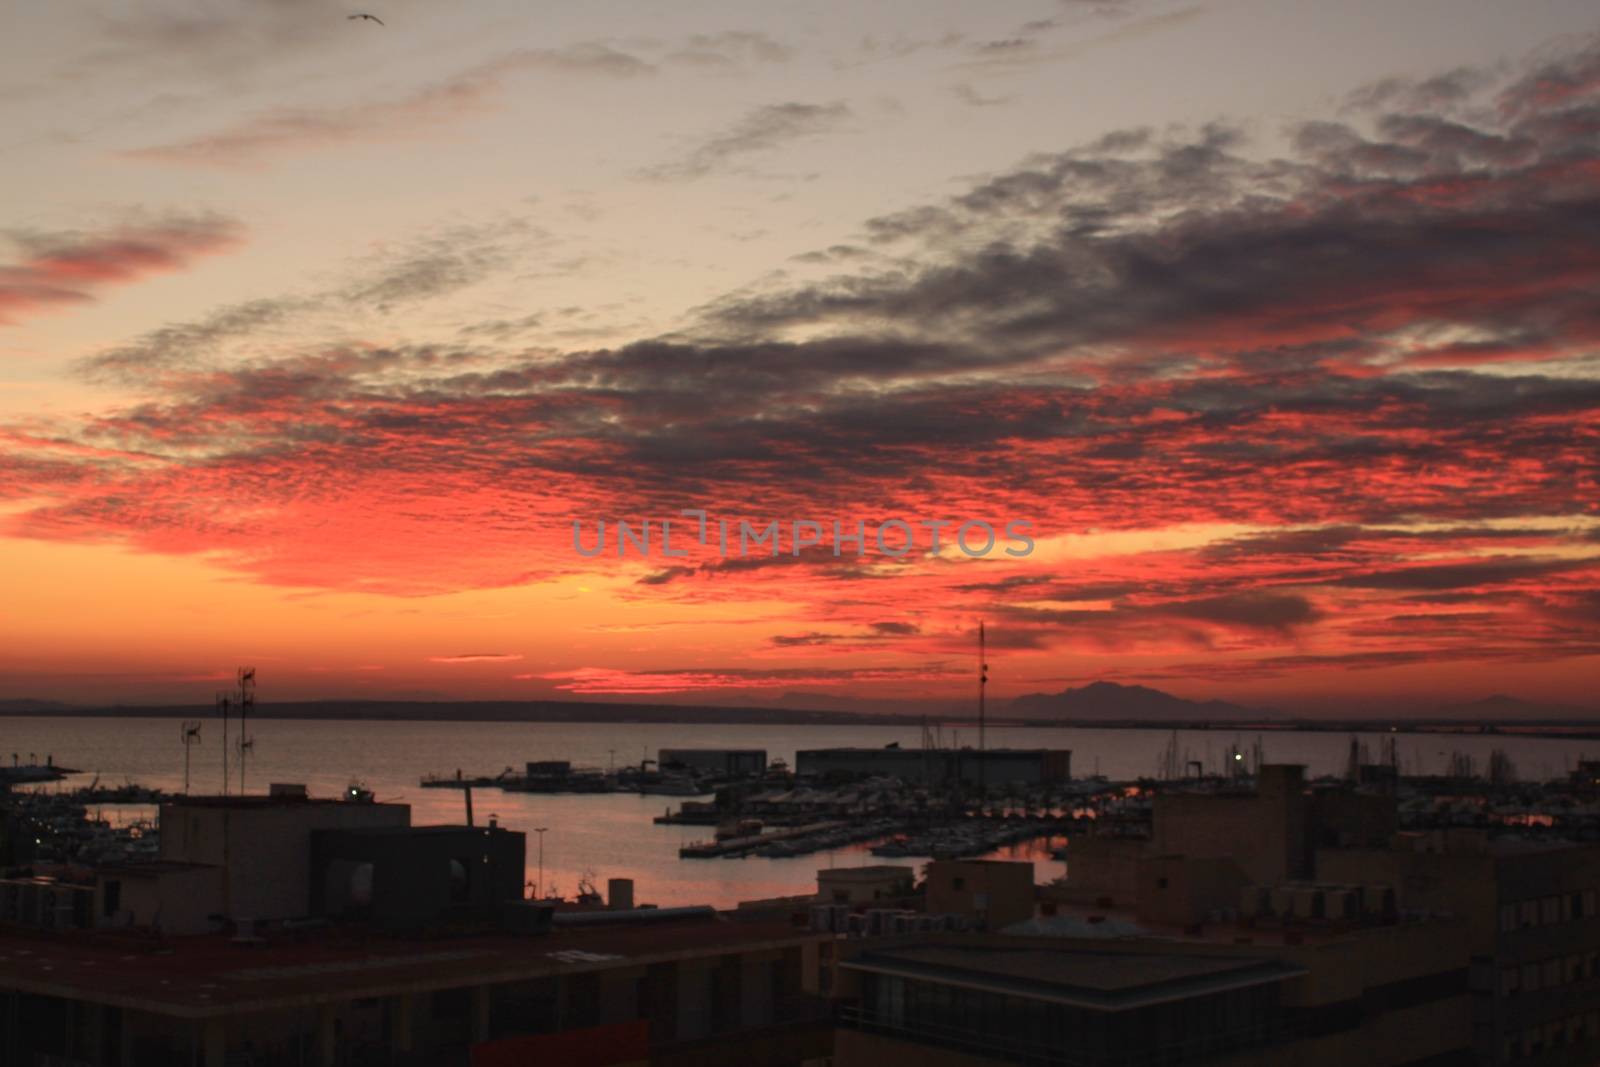 Sunset in Santa Pola, a small fishing village in southern Spain 